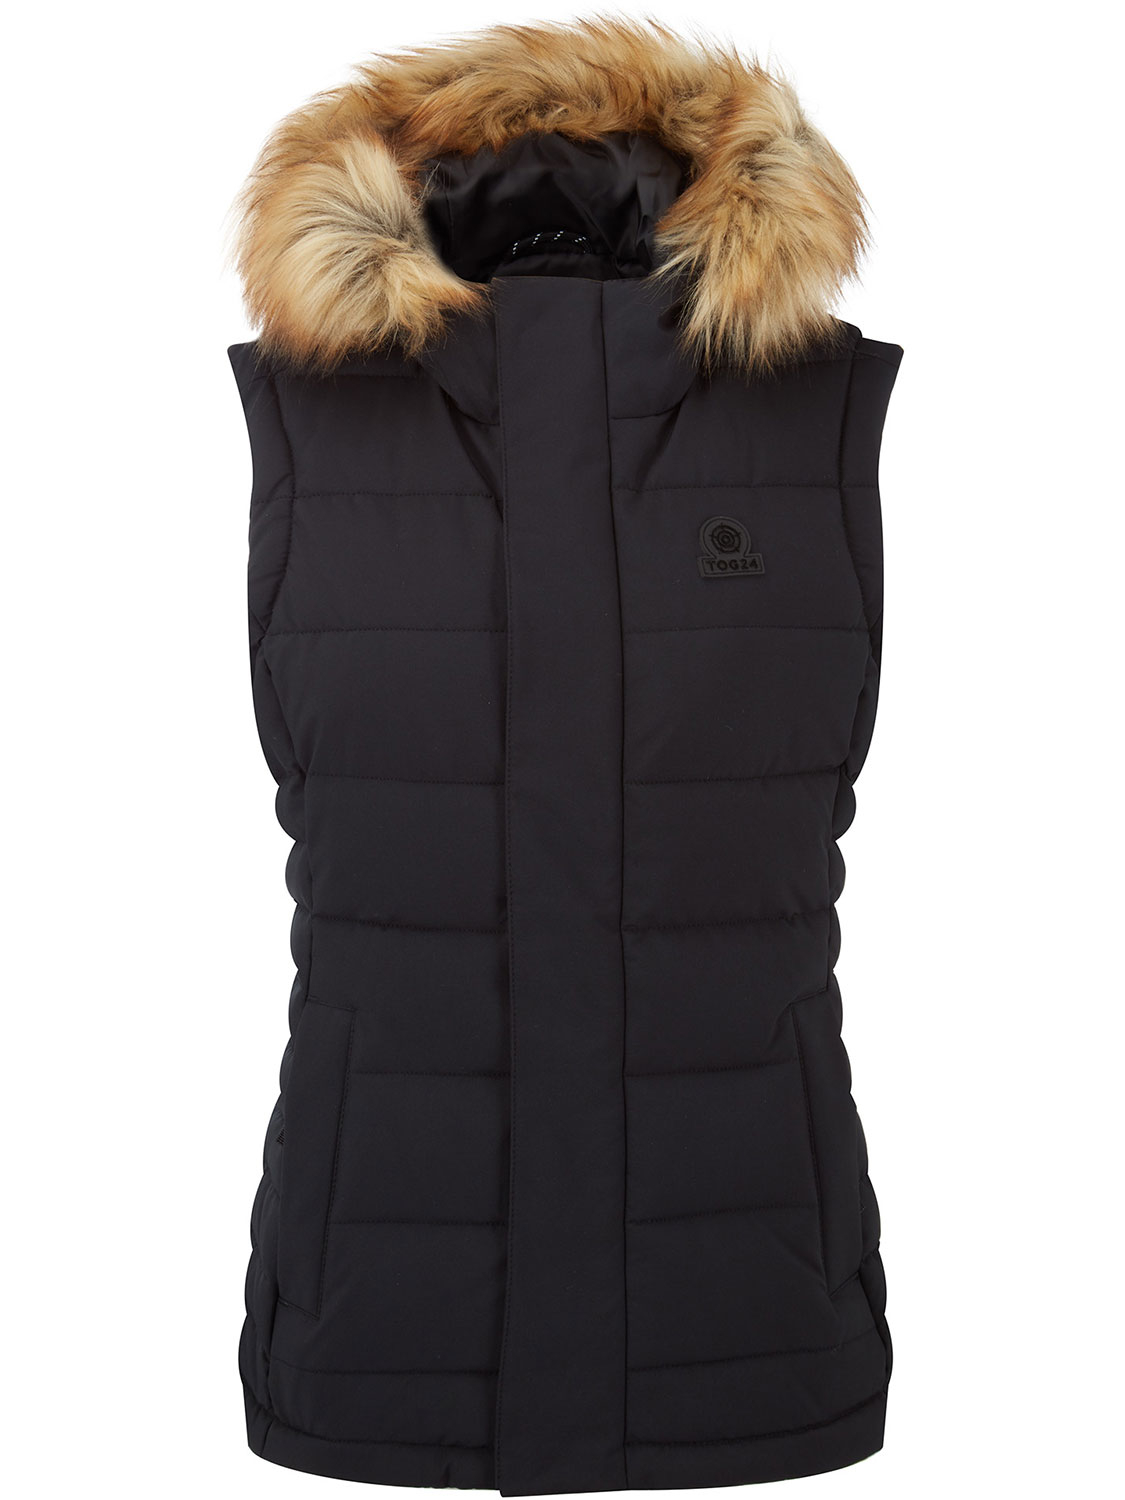 Cowling Insulated Gilet - Size: 16 Black Tog24